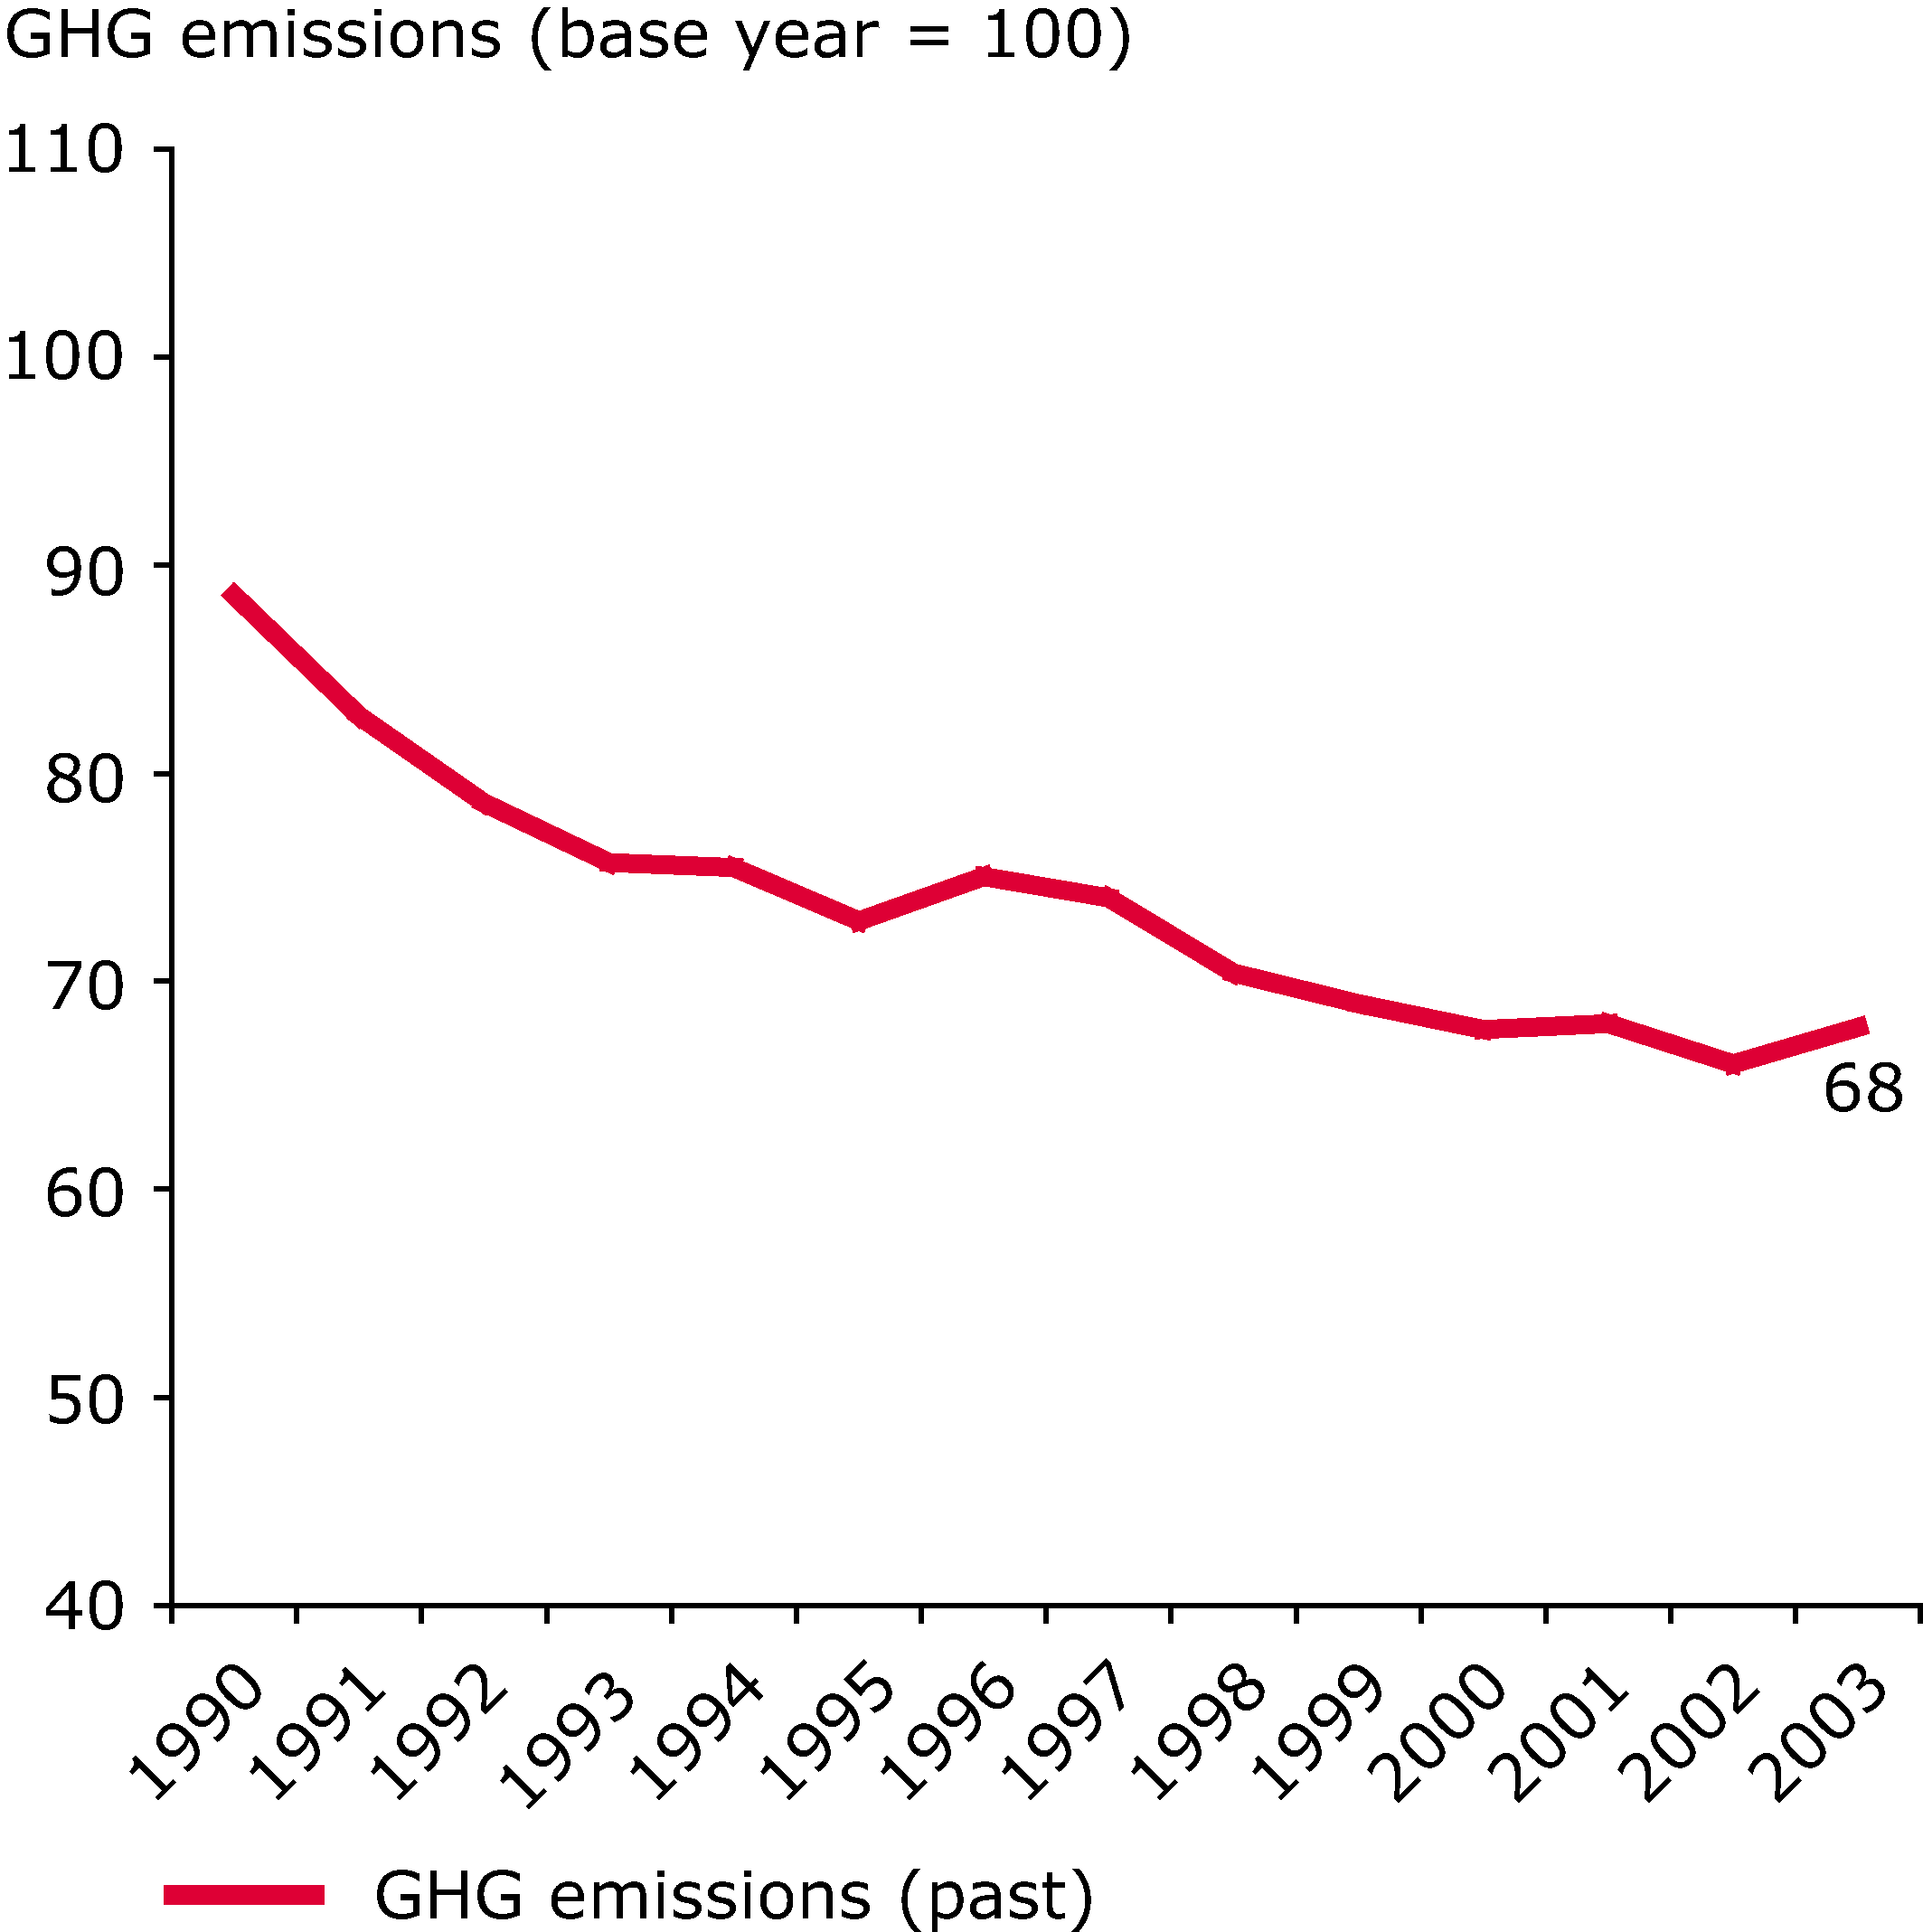 Development of the EU-10 greenhouse gas emissions from base year to 2003